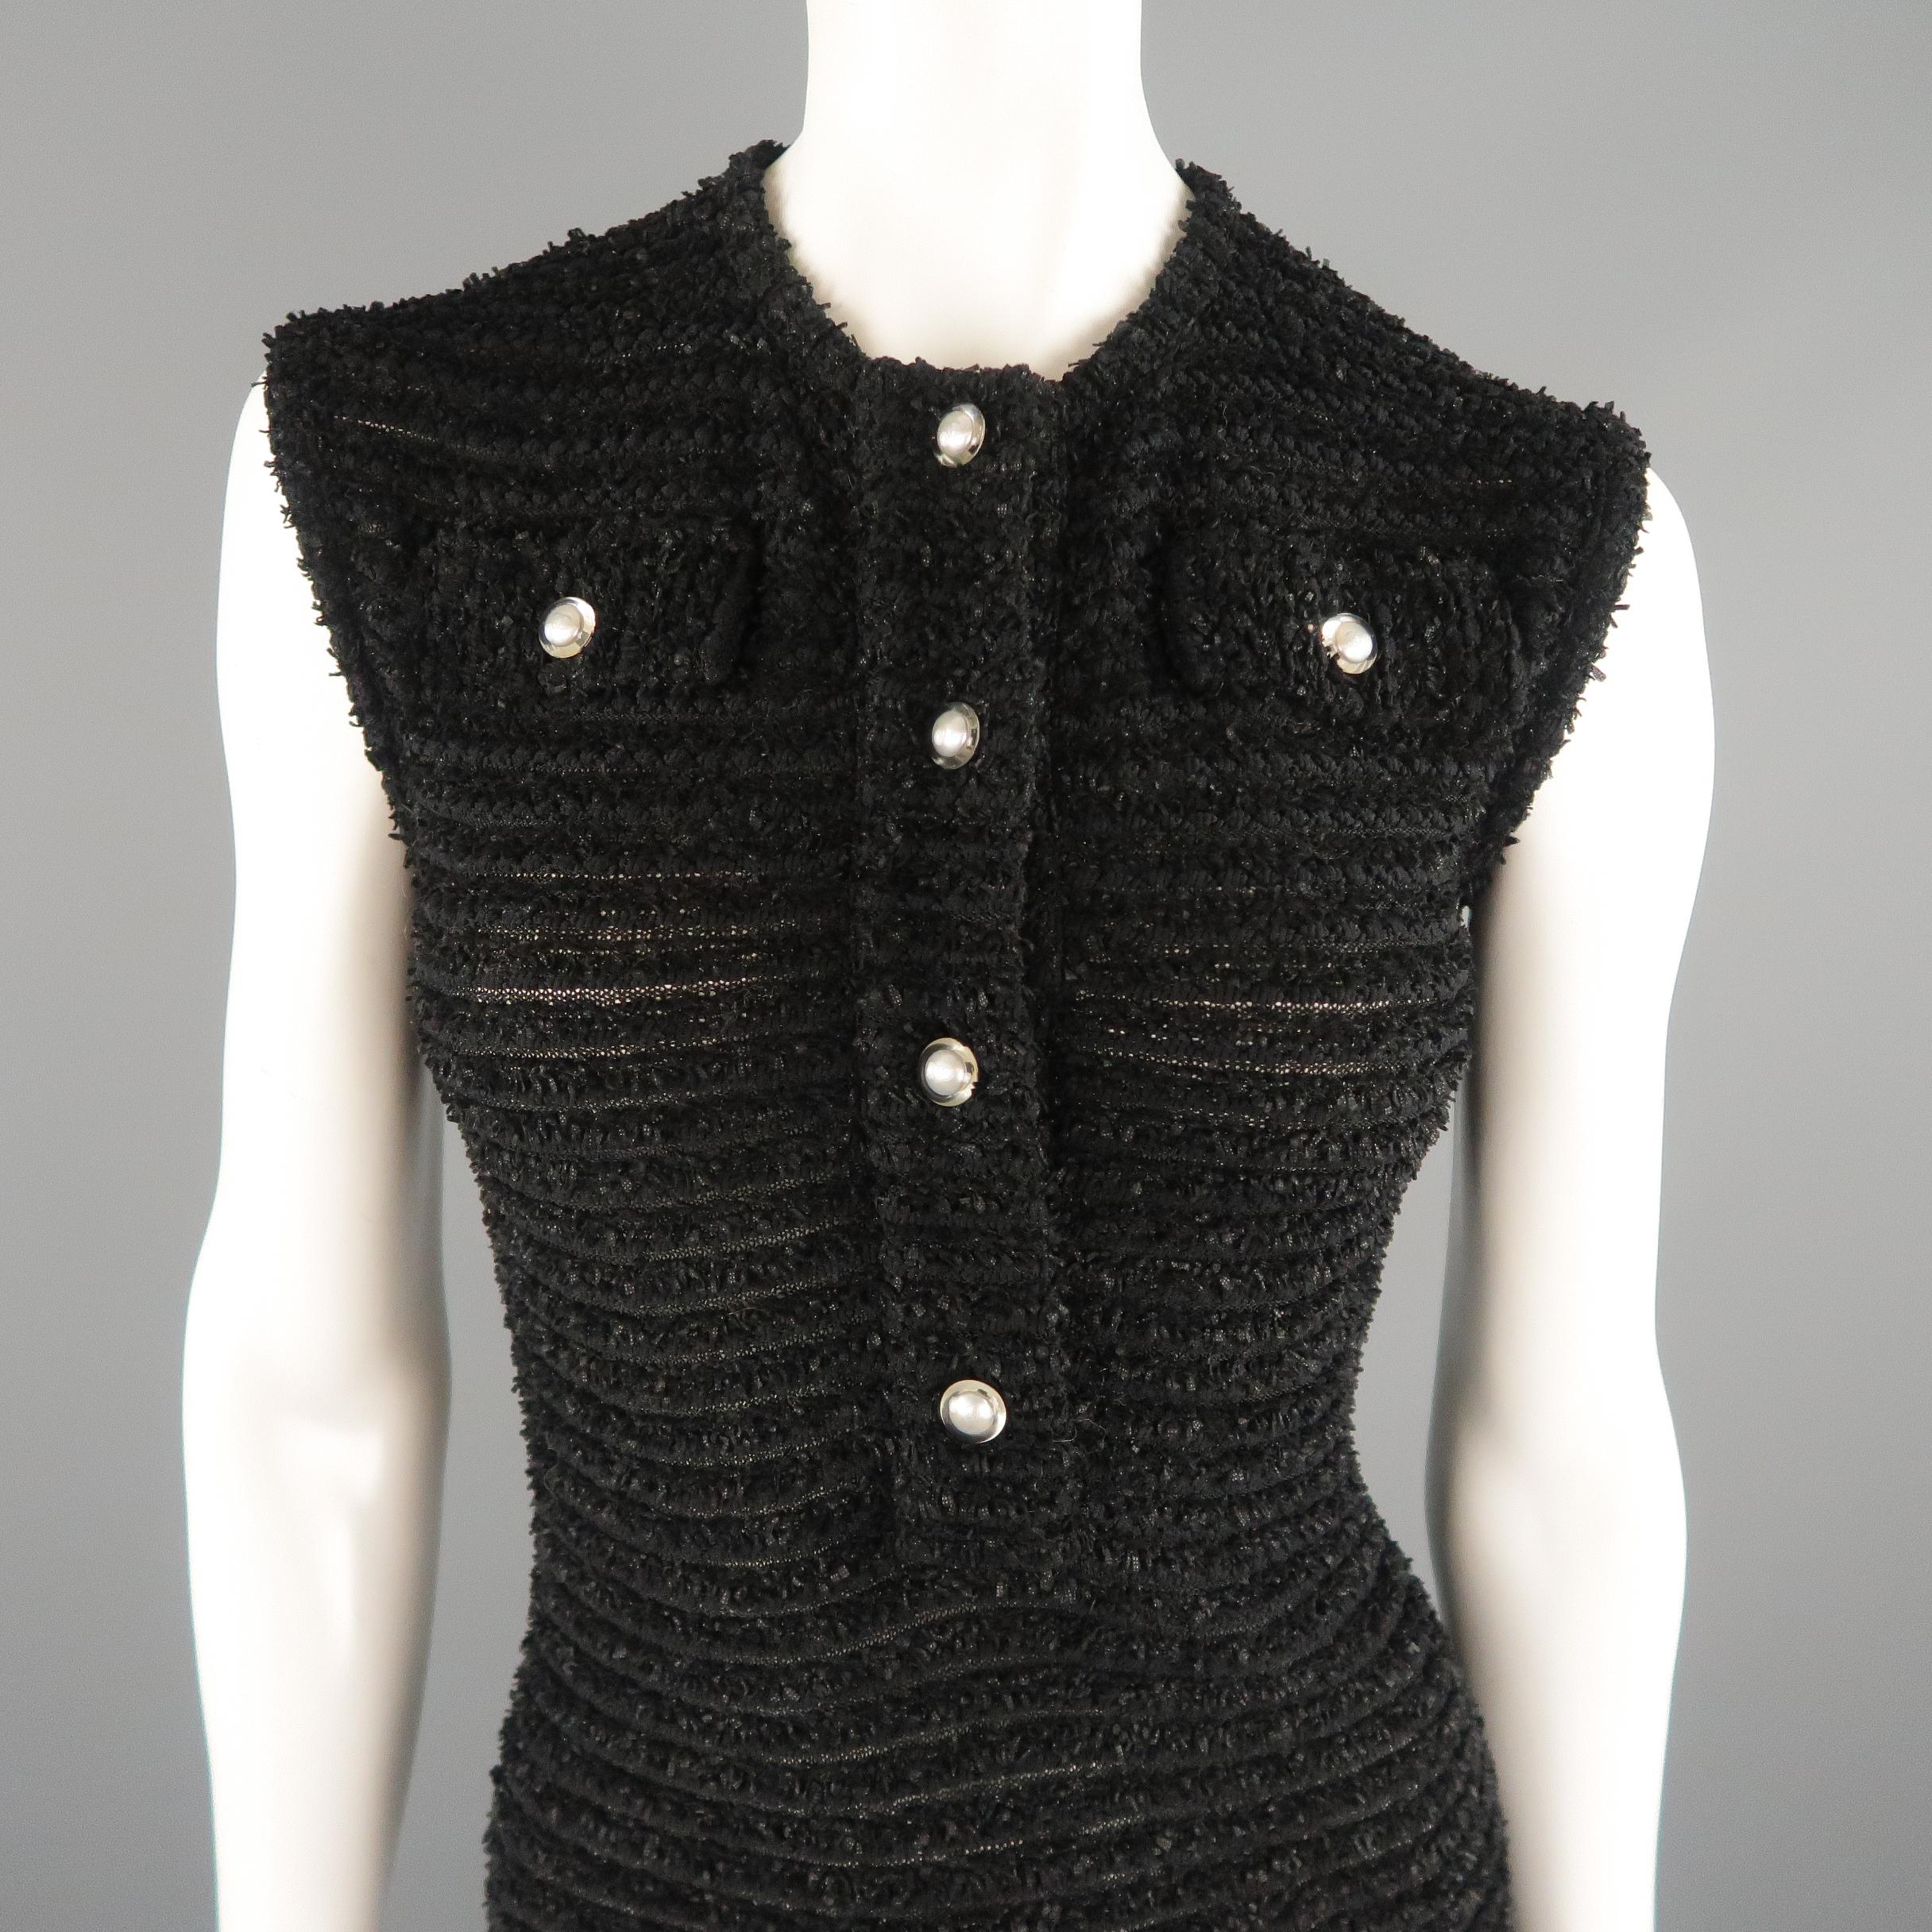 CHANEL shift dress comes in burnout striped textured tweed knit with a scoop neckline, flaired skirt, flap pockets, and half button closure with clear faux pearl CC buttons. Made in Italy.
 
Excellent Pre-Owned Condition.
Marked: FR 46
